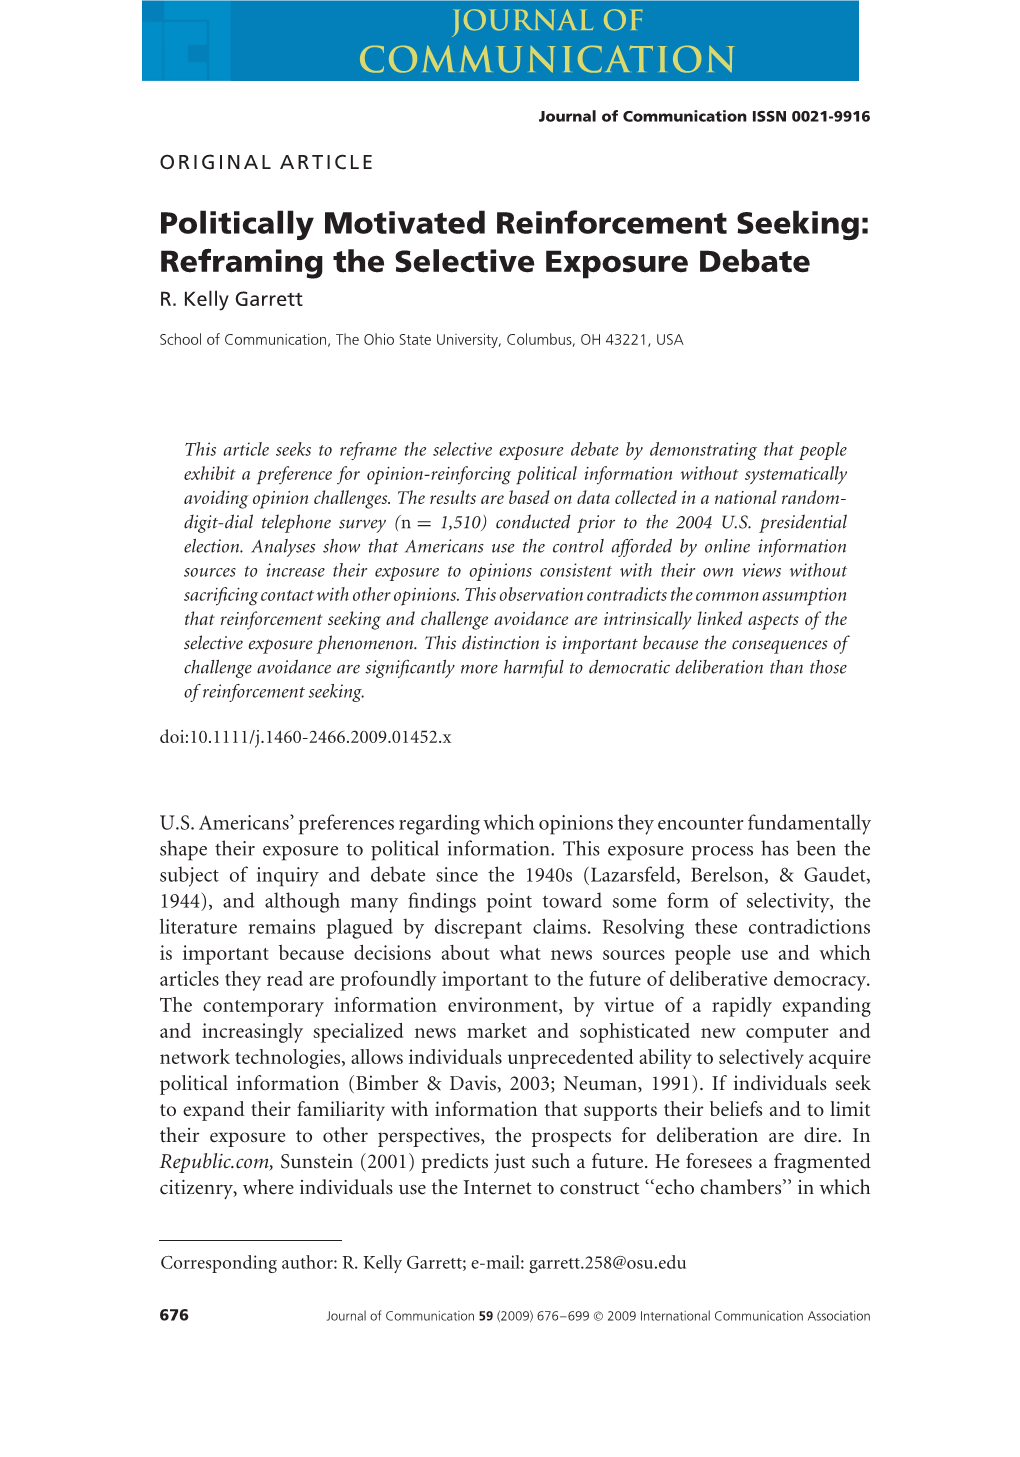 Politically Motivated Reinforcement Seeking: Reframing the Selective Exposure Debate R